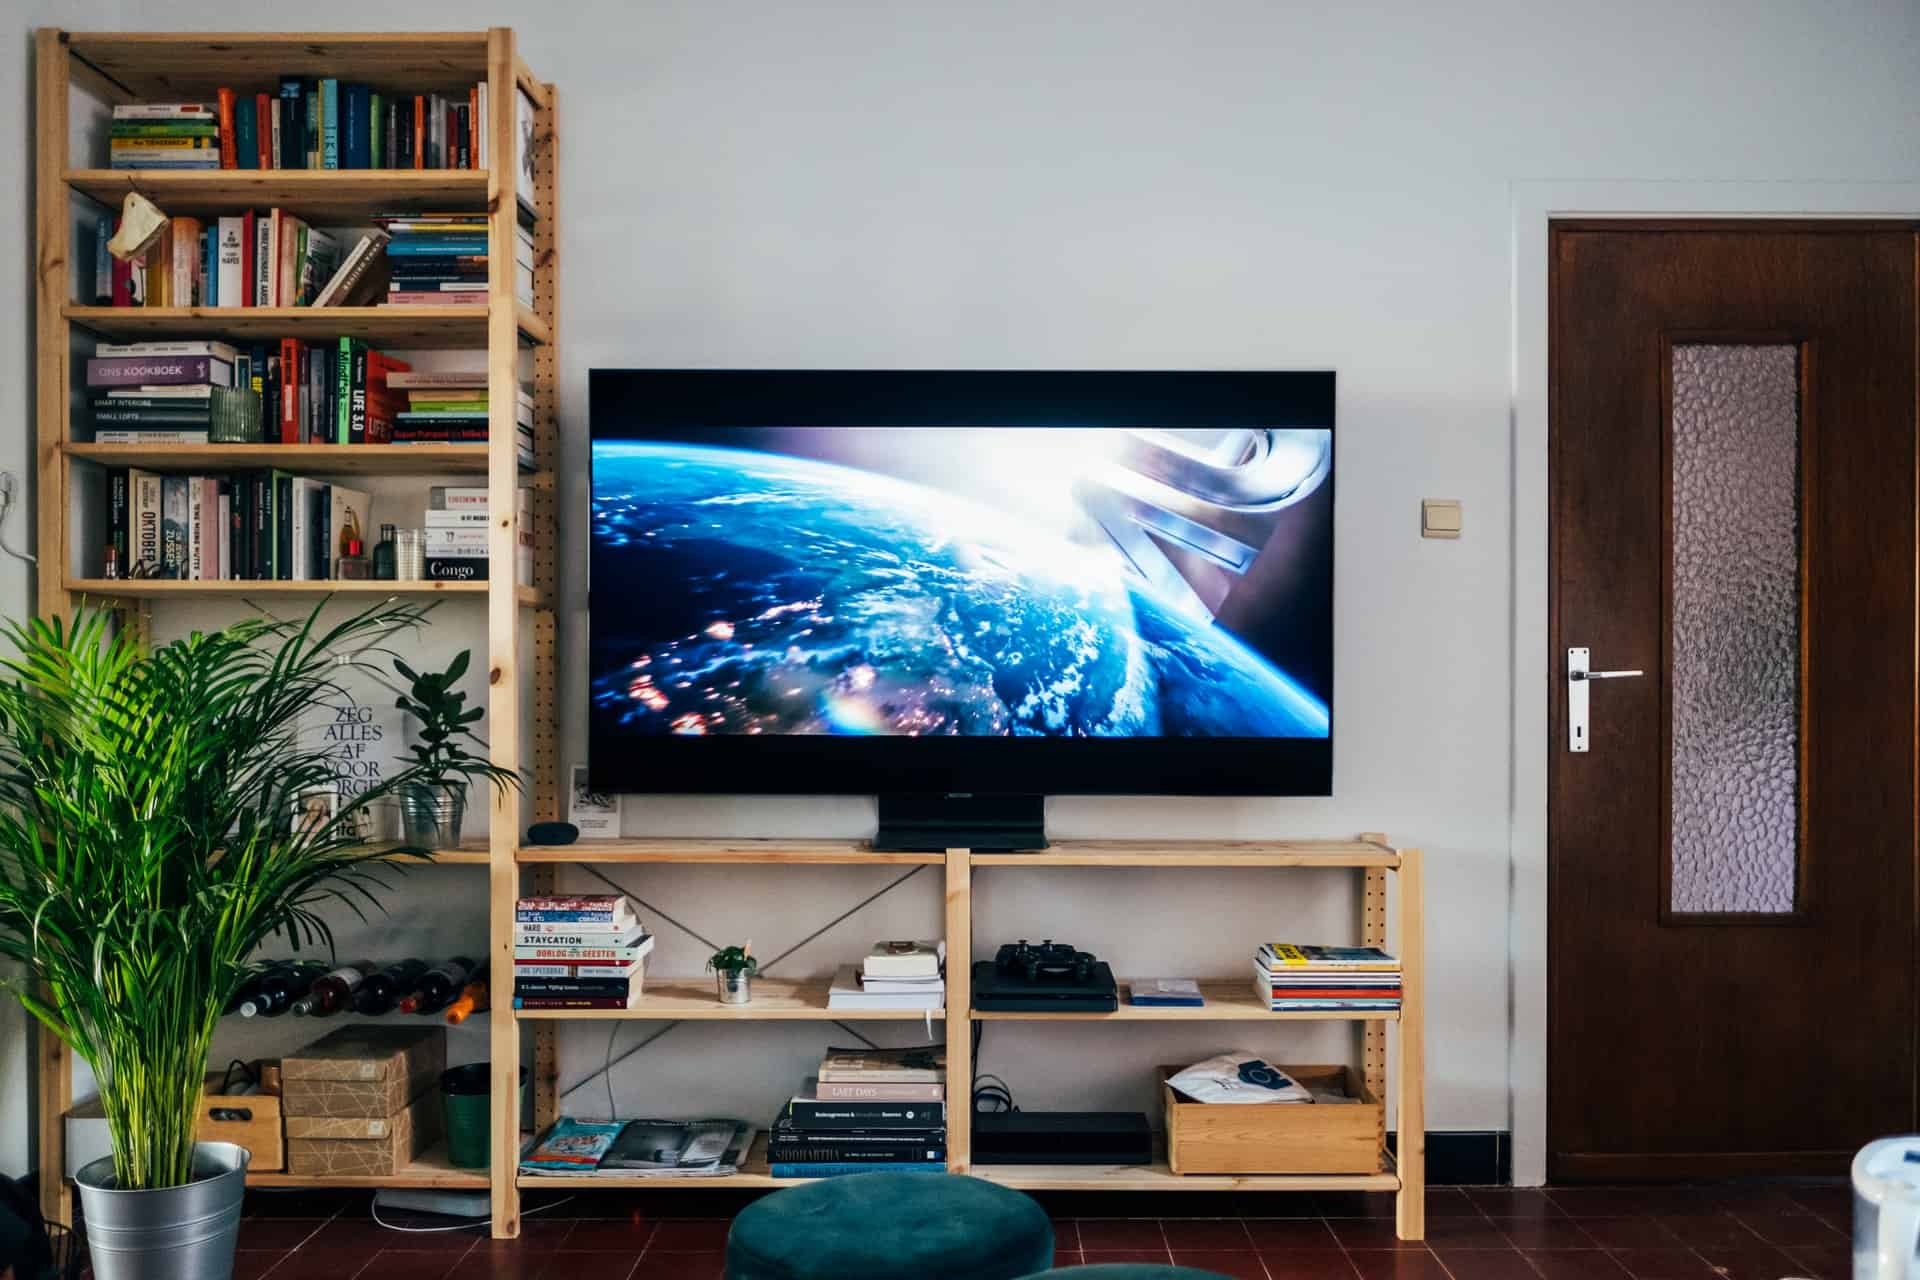 What is the right size of a TV set for a bachelor pad?